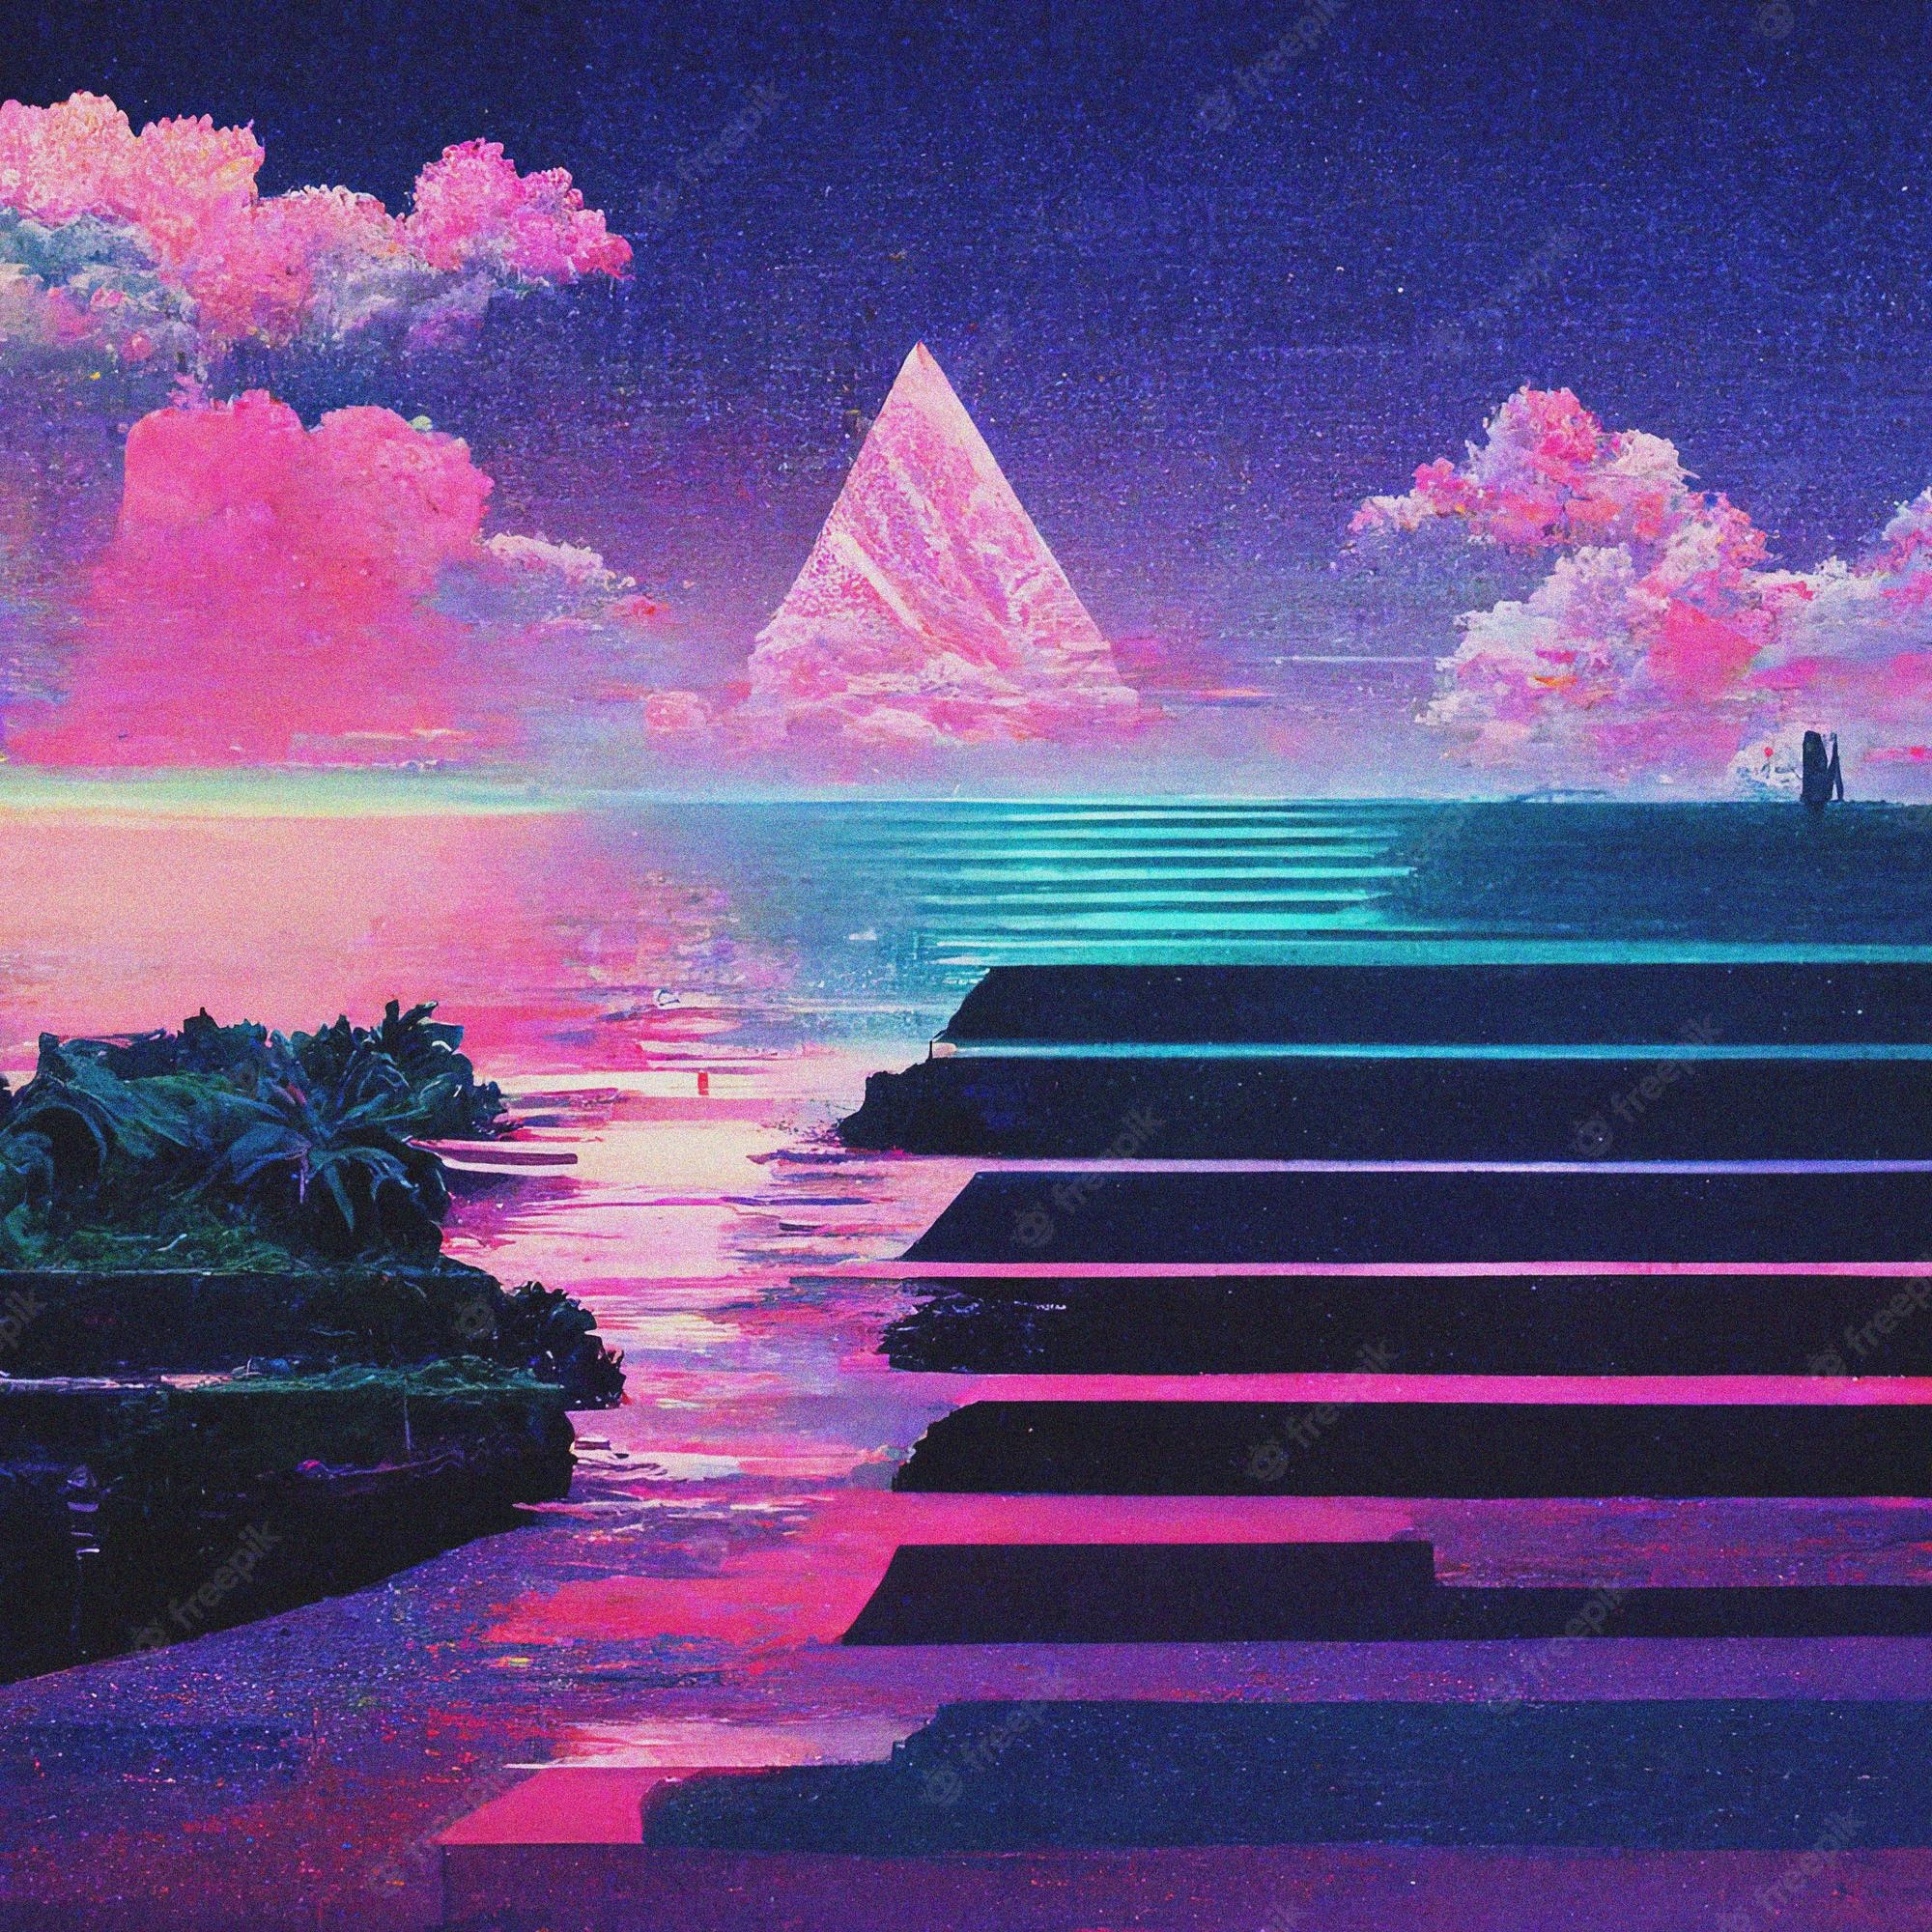 A painting of a pyramid in the distance, with steps leading into the water - Vaporwave